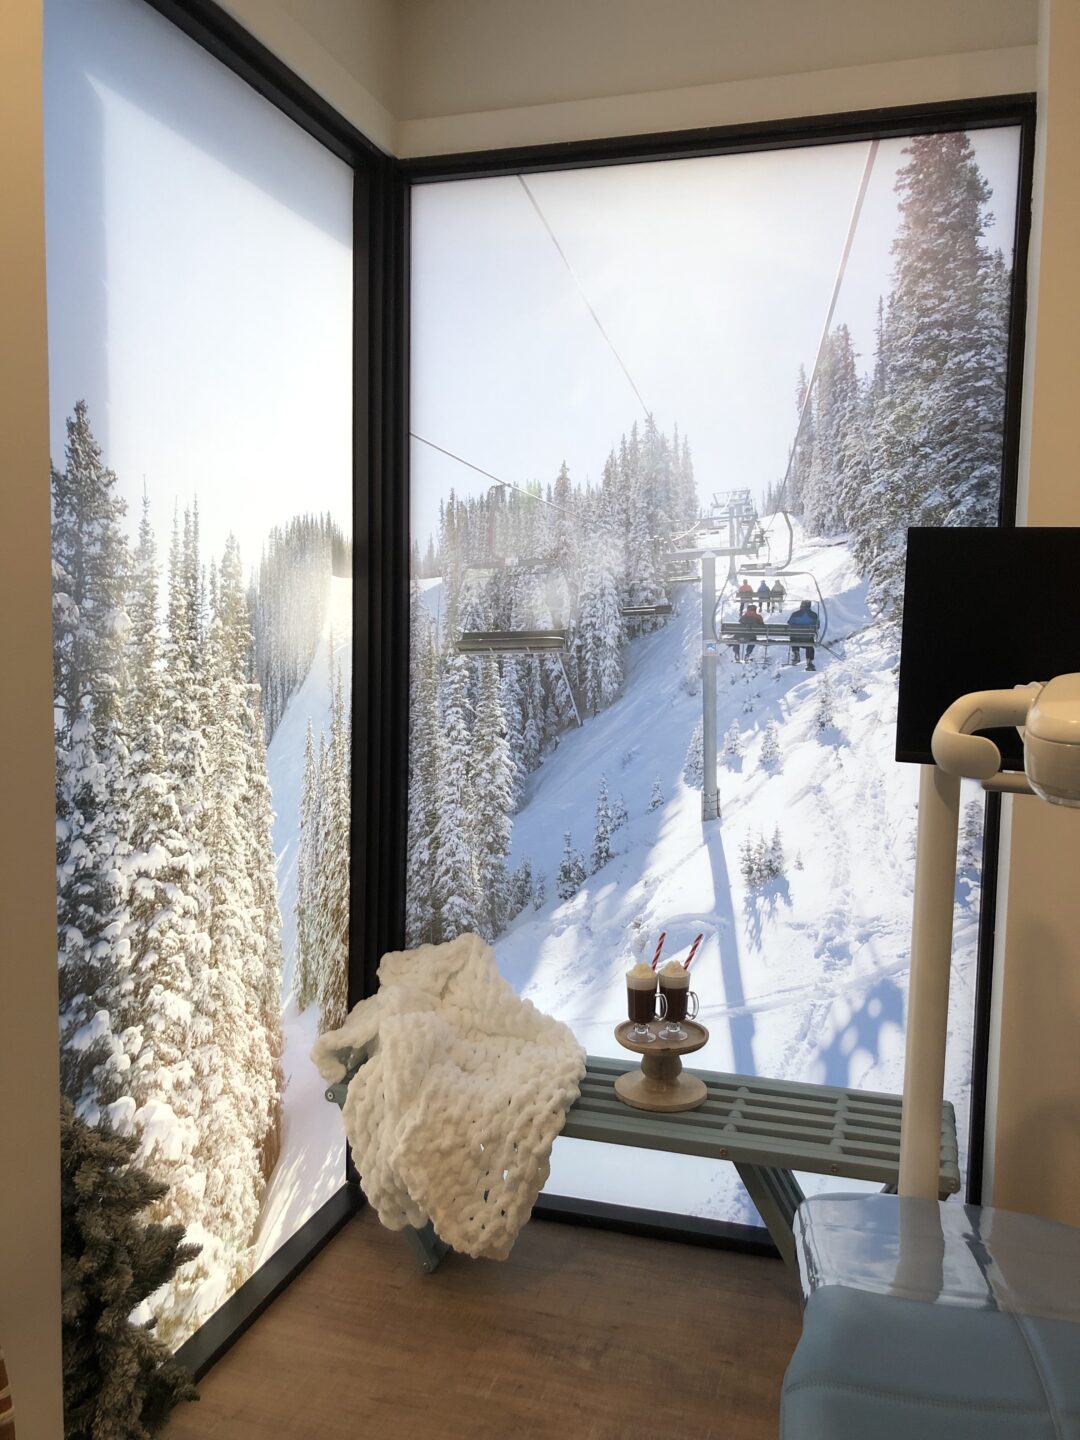 The inside of a dental exam room mimics a ski lodge with mountain scenes, a bench, and hot chocolate.